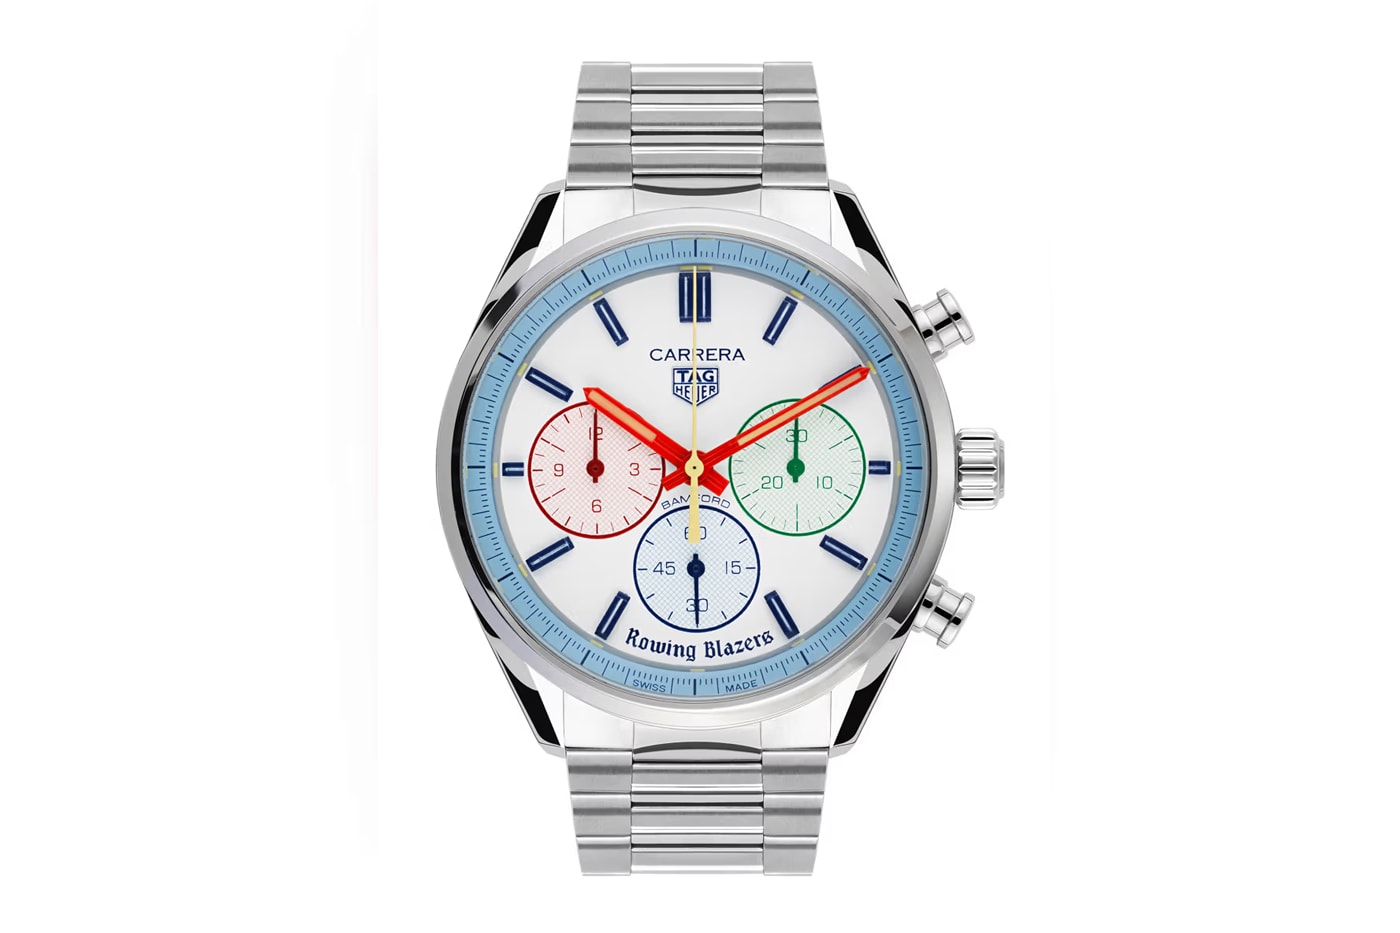 Rowing Blazers and TAG Heuer Unveil Limited-Edition "Yacht-Timer" Carrera Timepiece